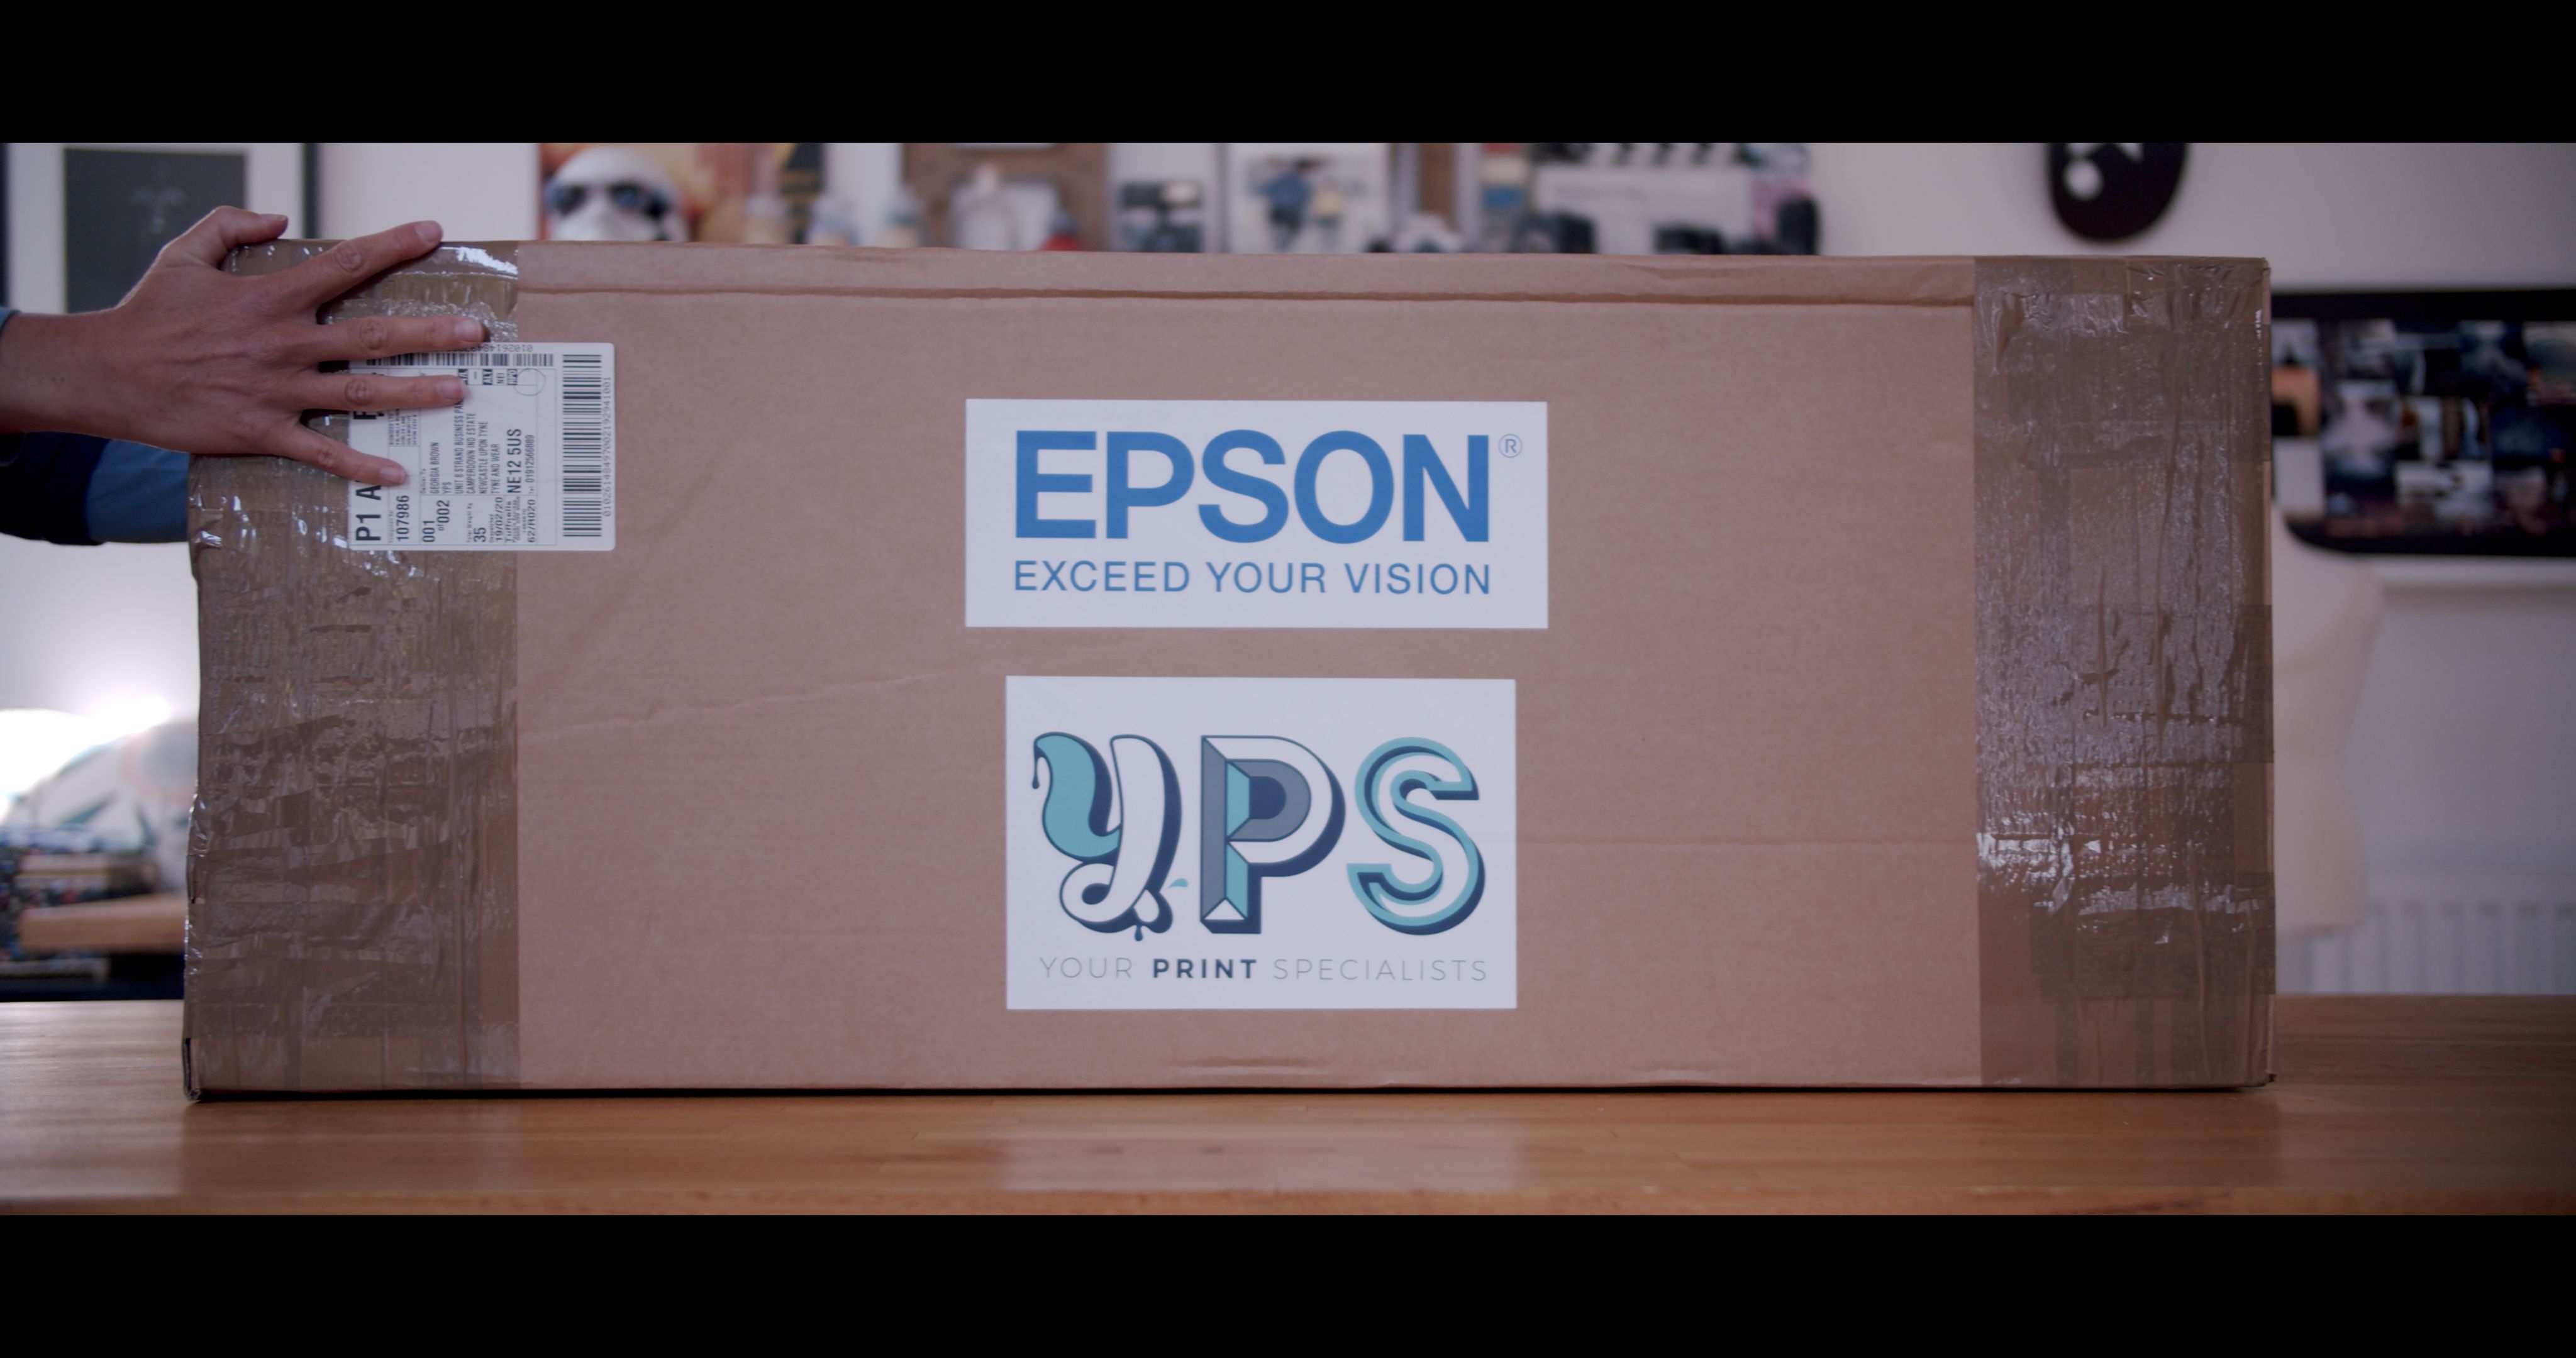 Epson SureColor SC-F500 - Dye Sublimation - YPS Business in a Box